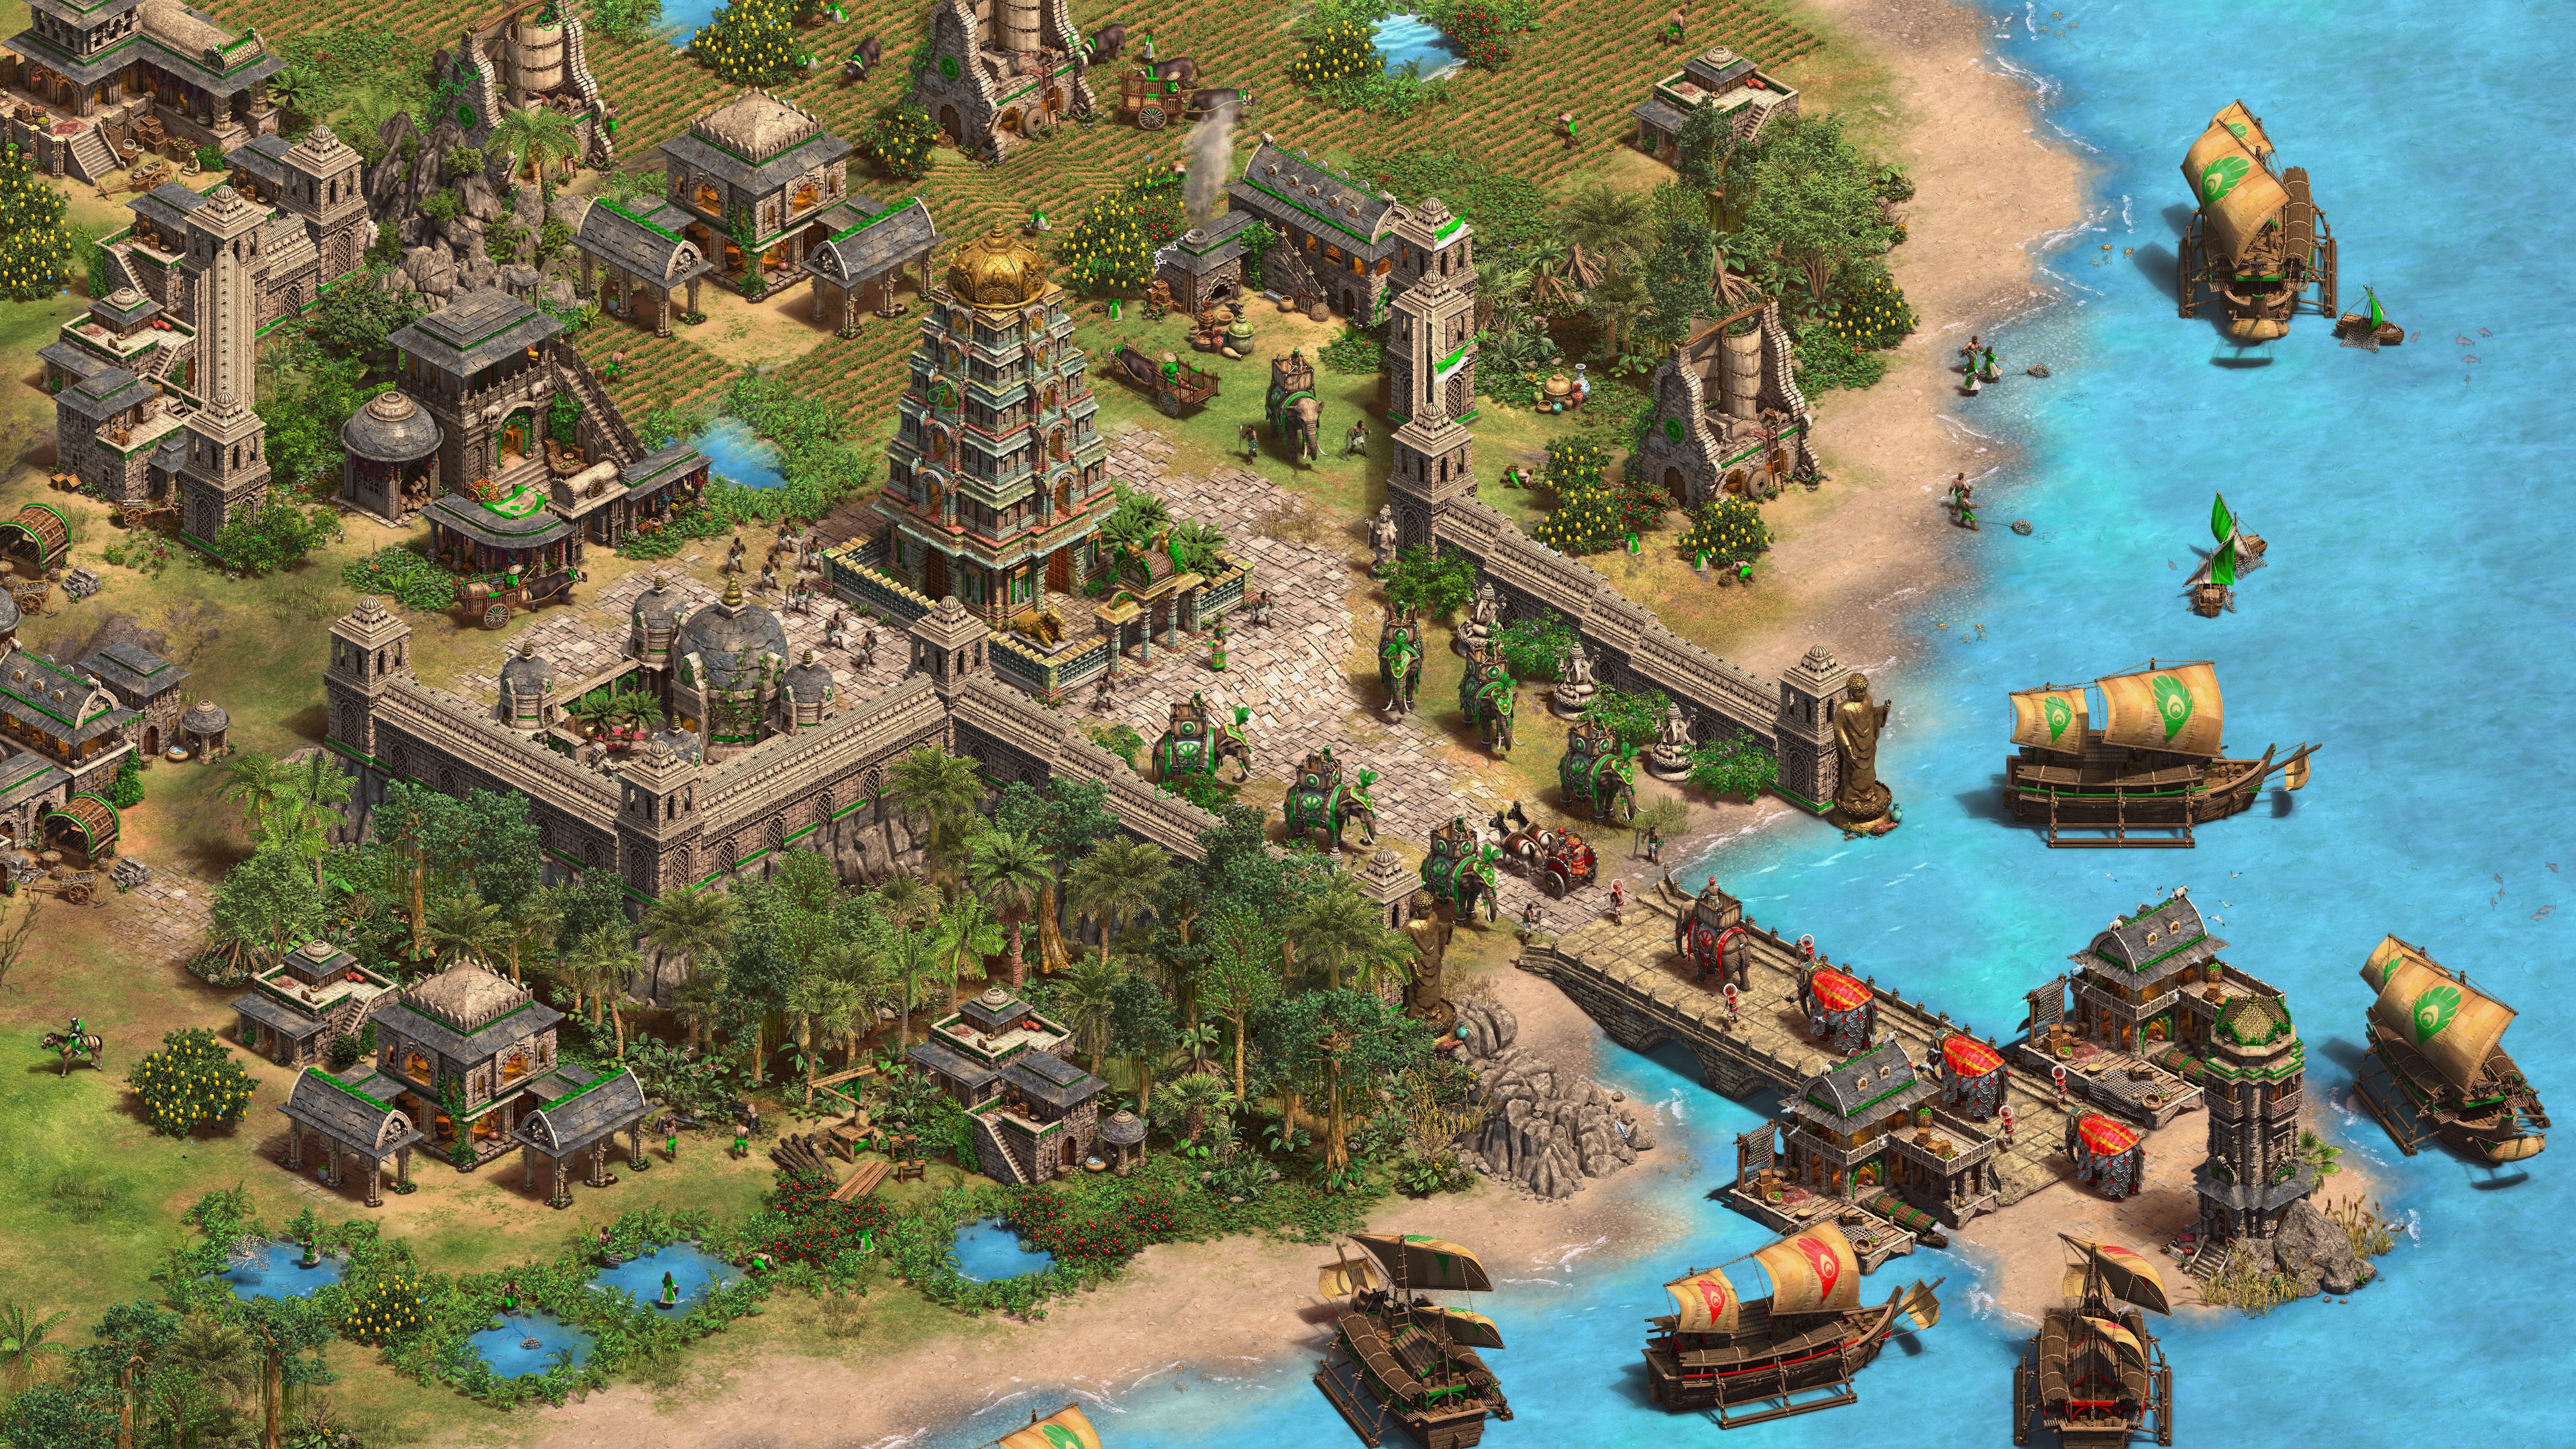 Age of Empires II: Definitive Edition - Dynasties of India screenshot 45685